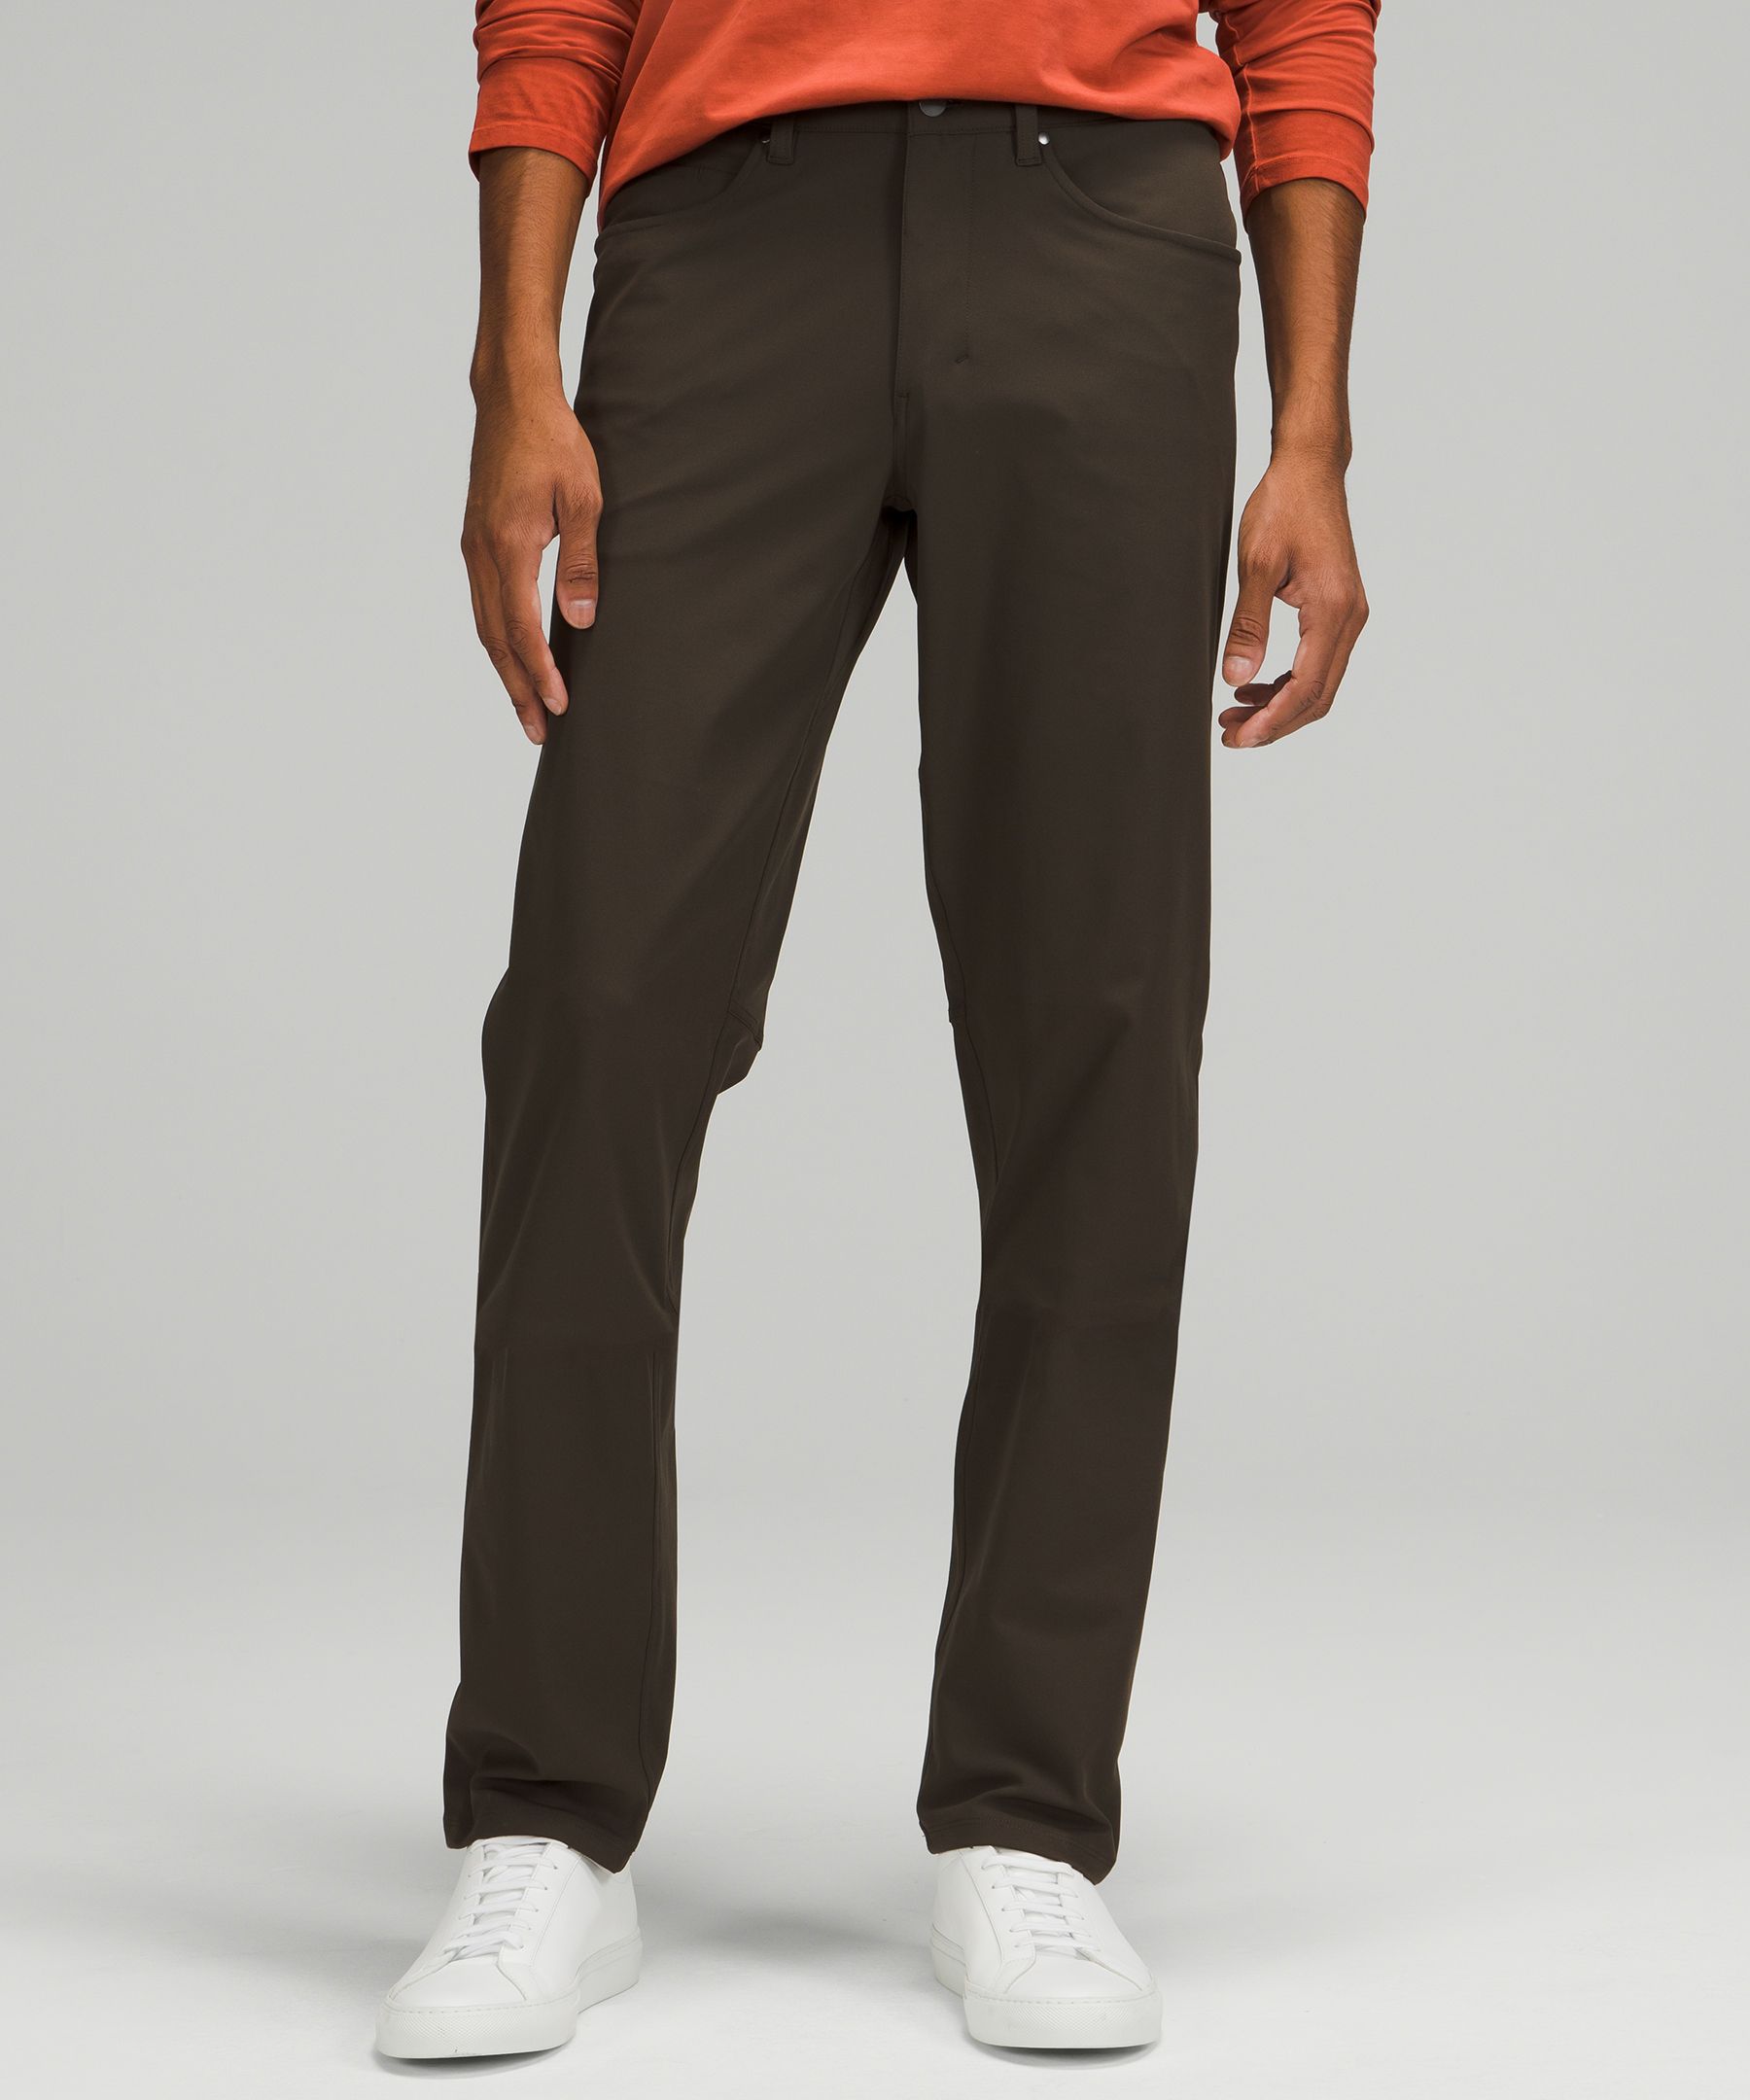 Lululemon Abc Pants Review Reddit News  International Society of Precision  Agriculture